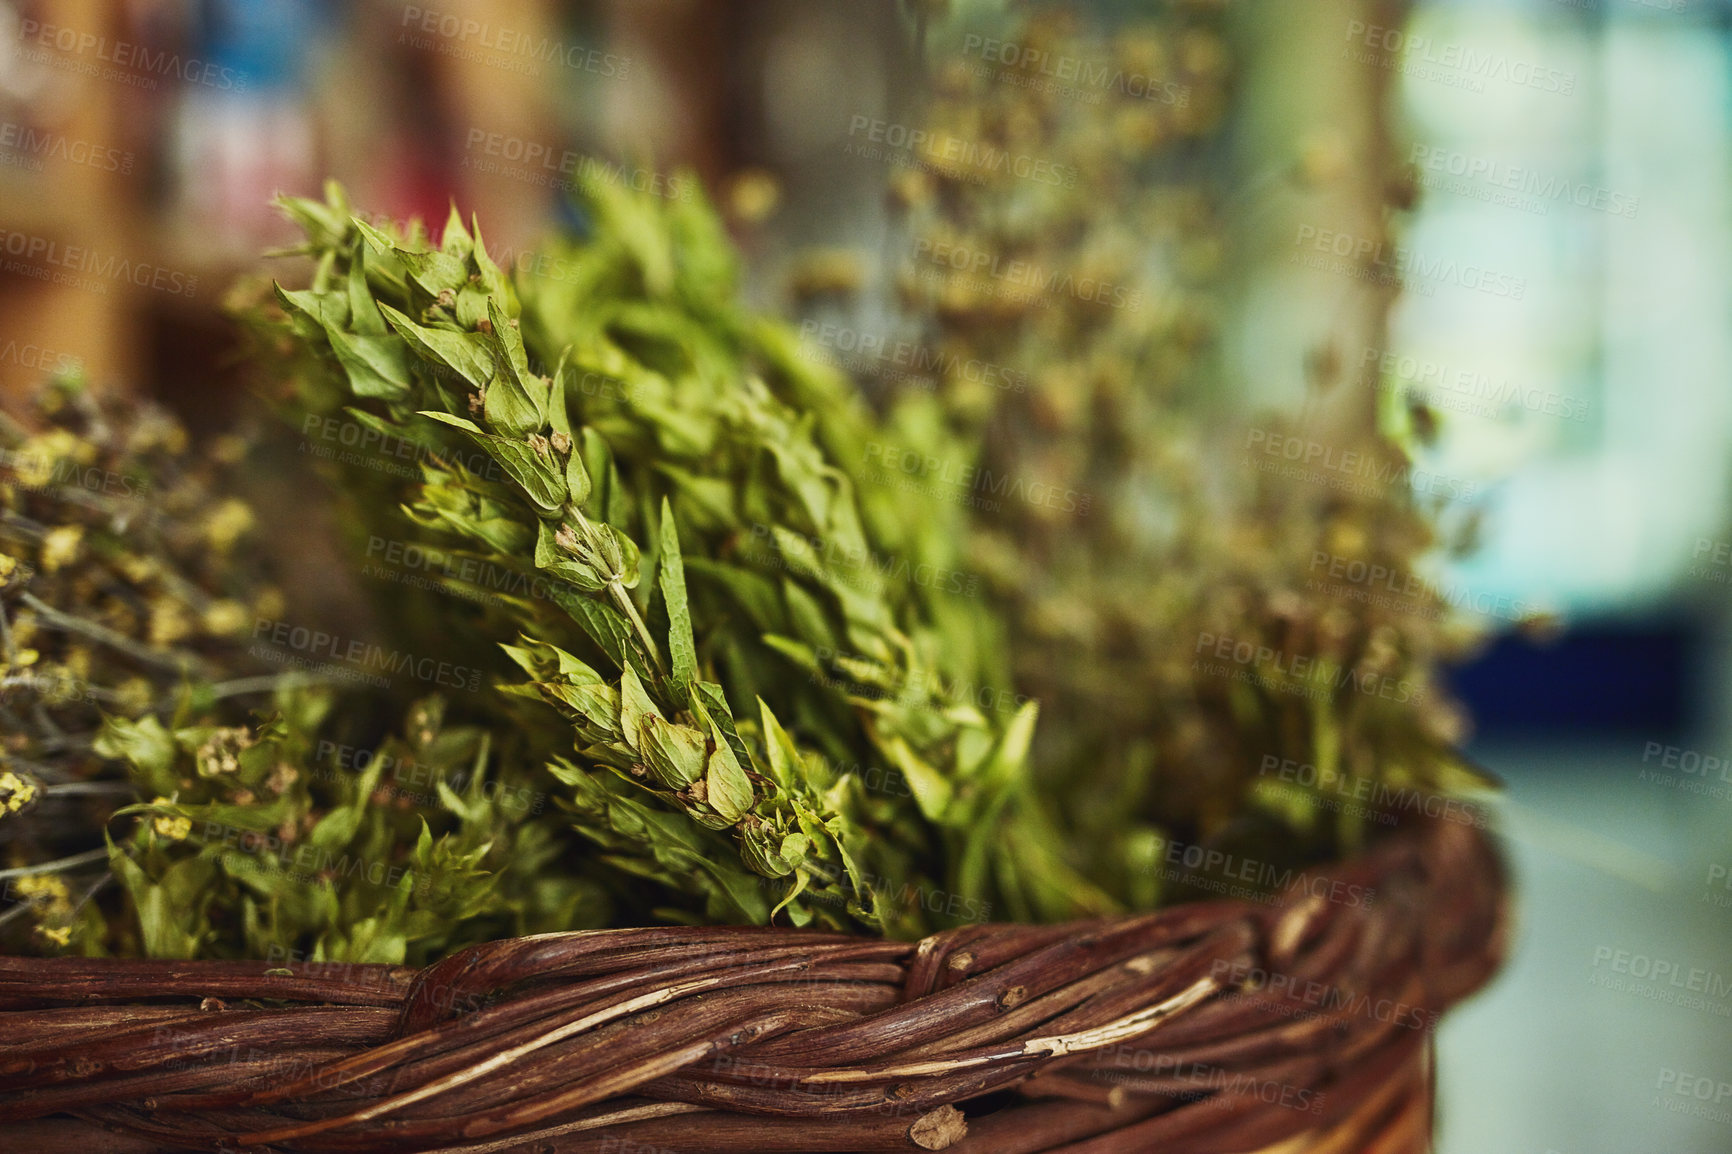 Buy stock photo Shot of herbs in a store 